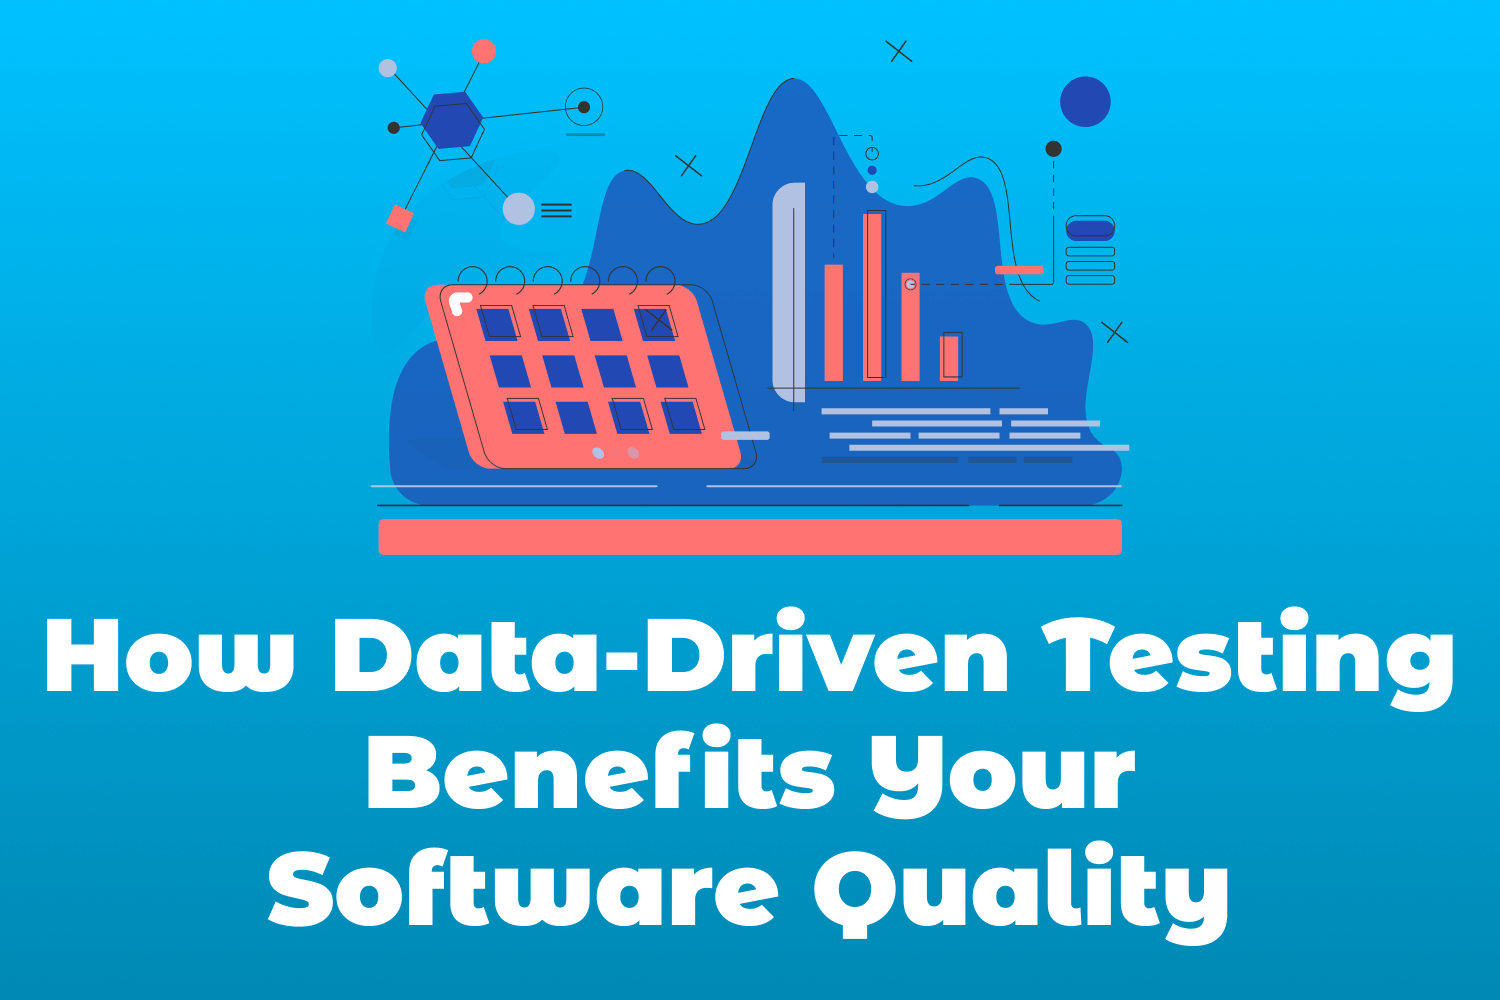 How Data-Driven Testing Benefits Your Software Quality